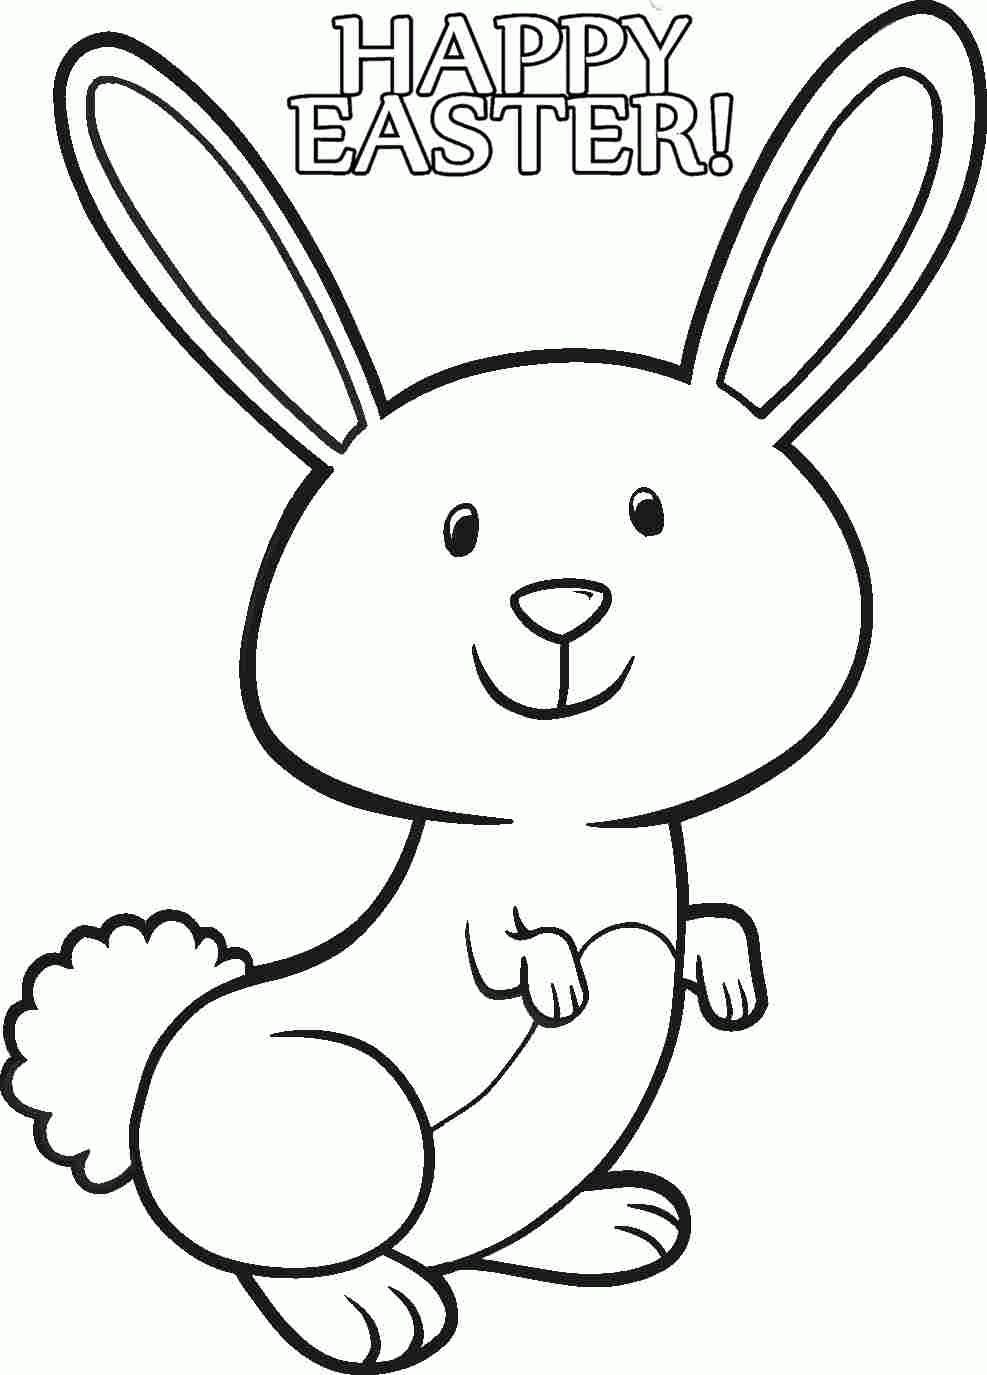 Bunny Coloring Page - Coloring Pages for Kids and for Adults